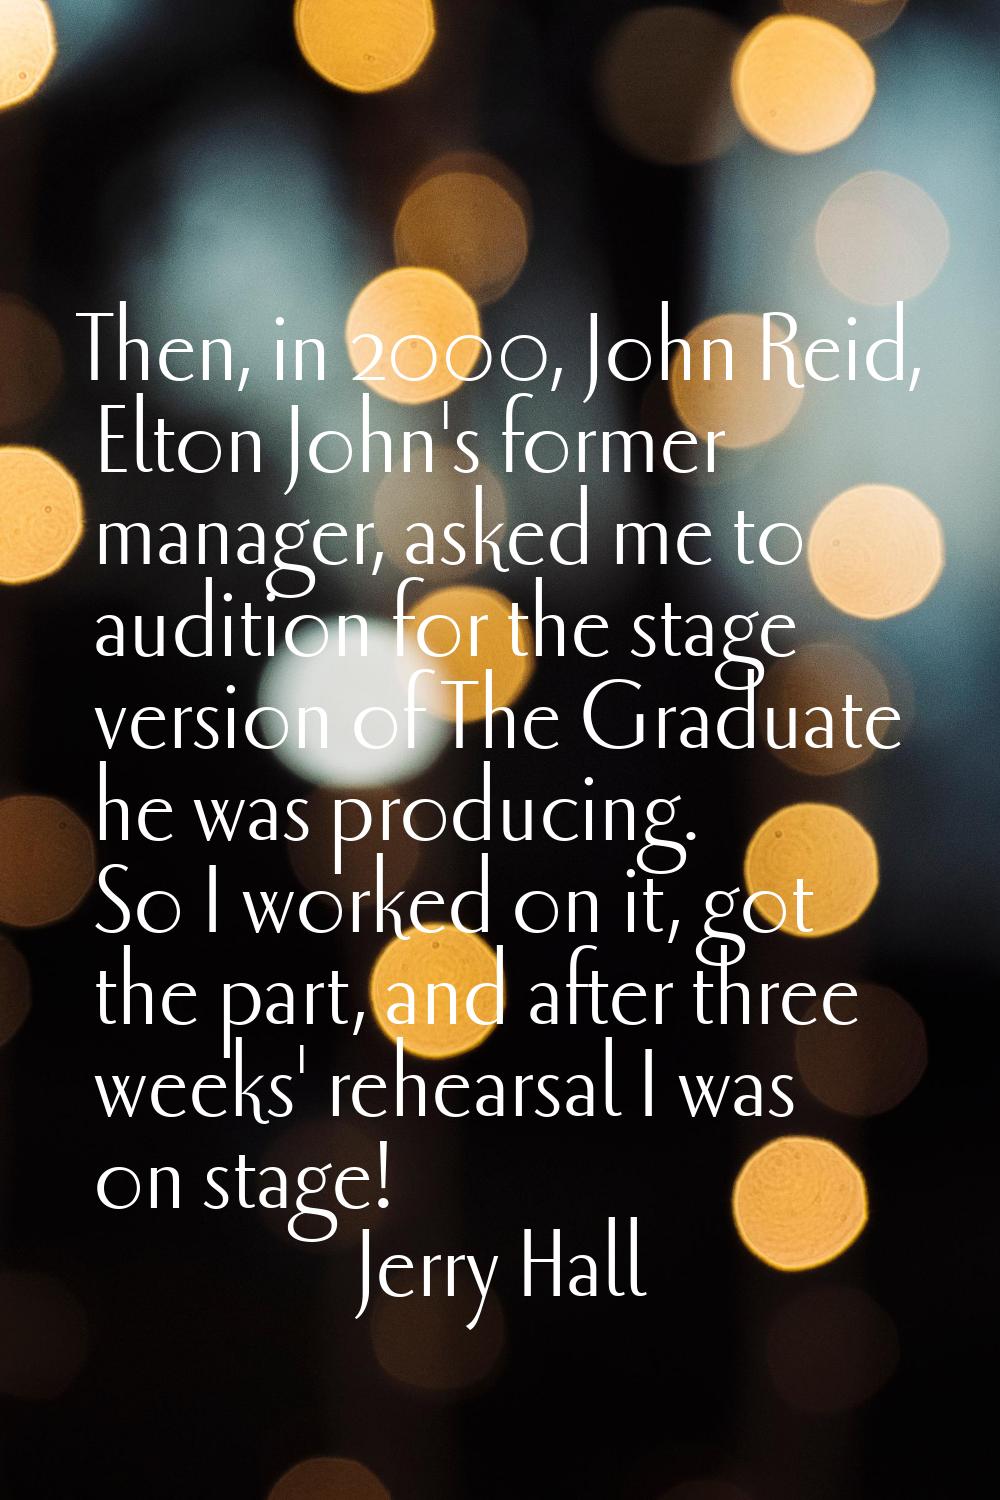 Then, in 2000, John Reid, Elton John's former manager, asked me to audition for the stage version o